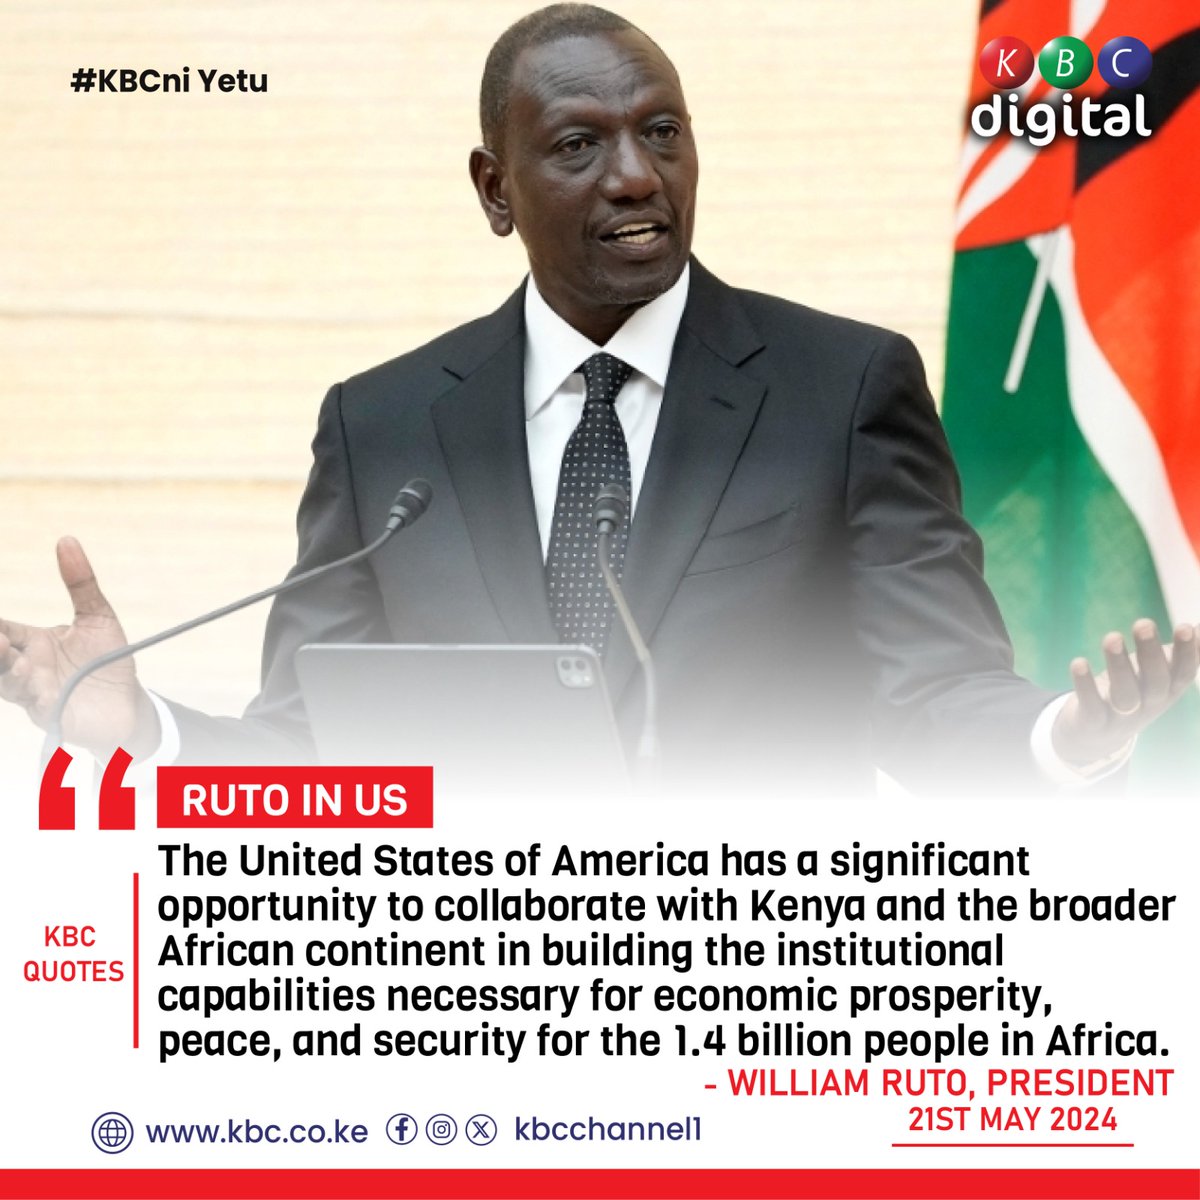 'The United States of America has a significant opportunity to collaborate with Kenya and the broader African continent in building the institutional capabilities necessary for economic prosperity, peace, and security for the 1.4 billion people in Africa.' President William Ruto